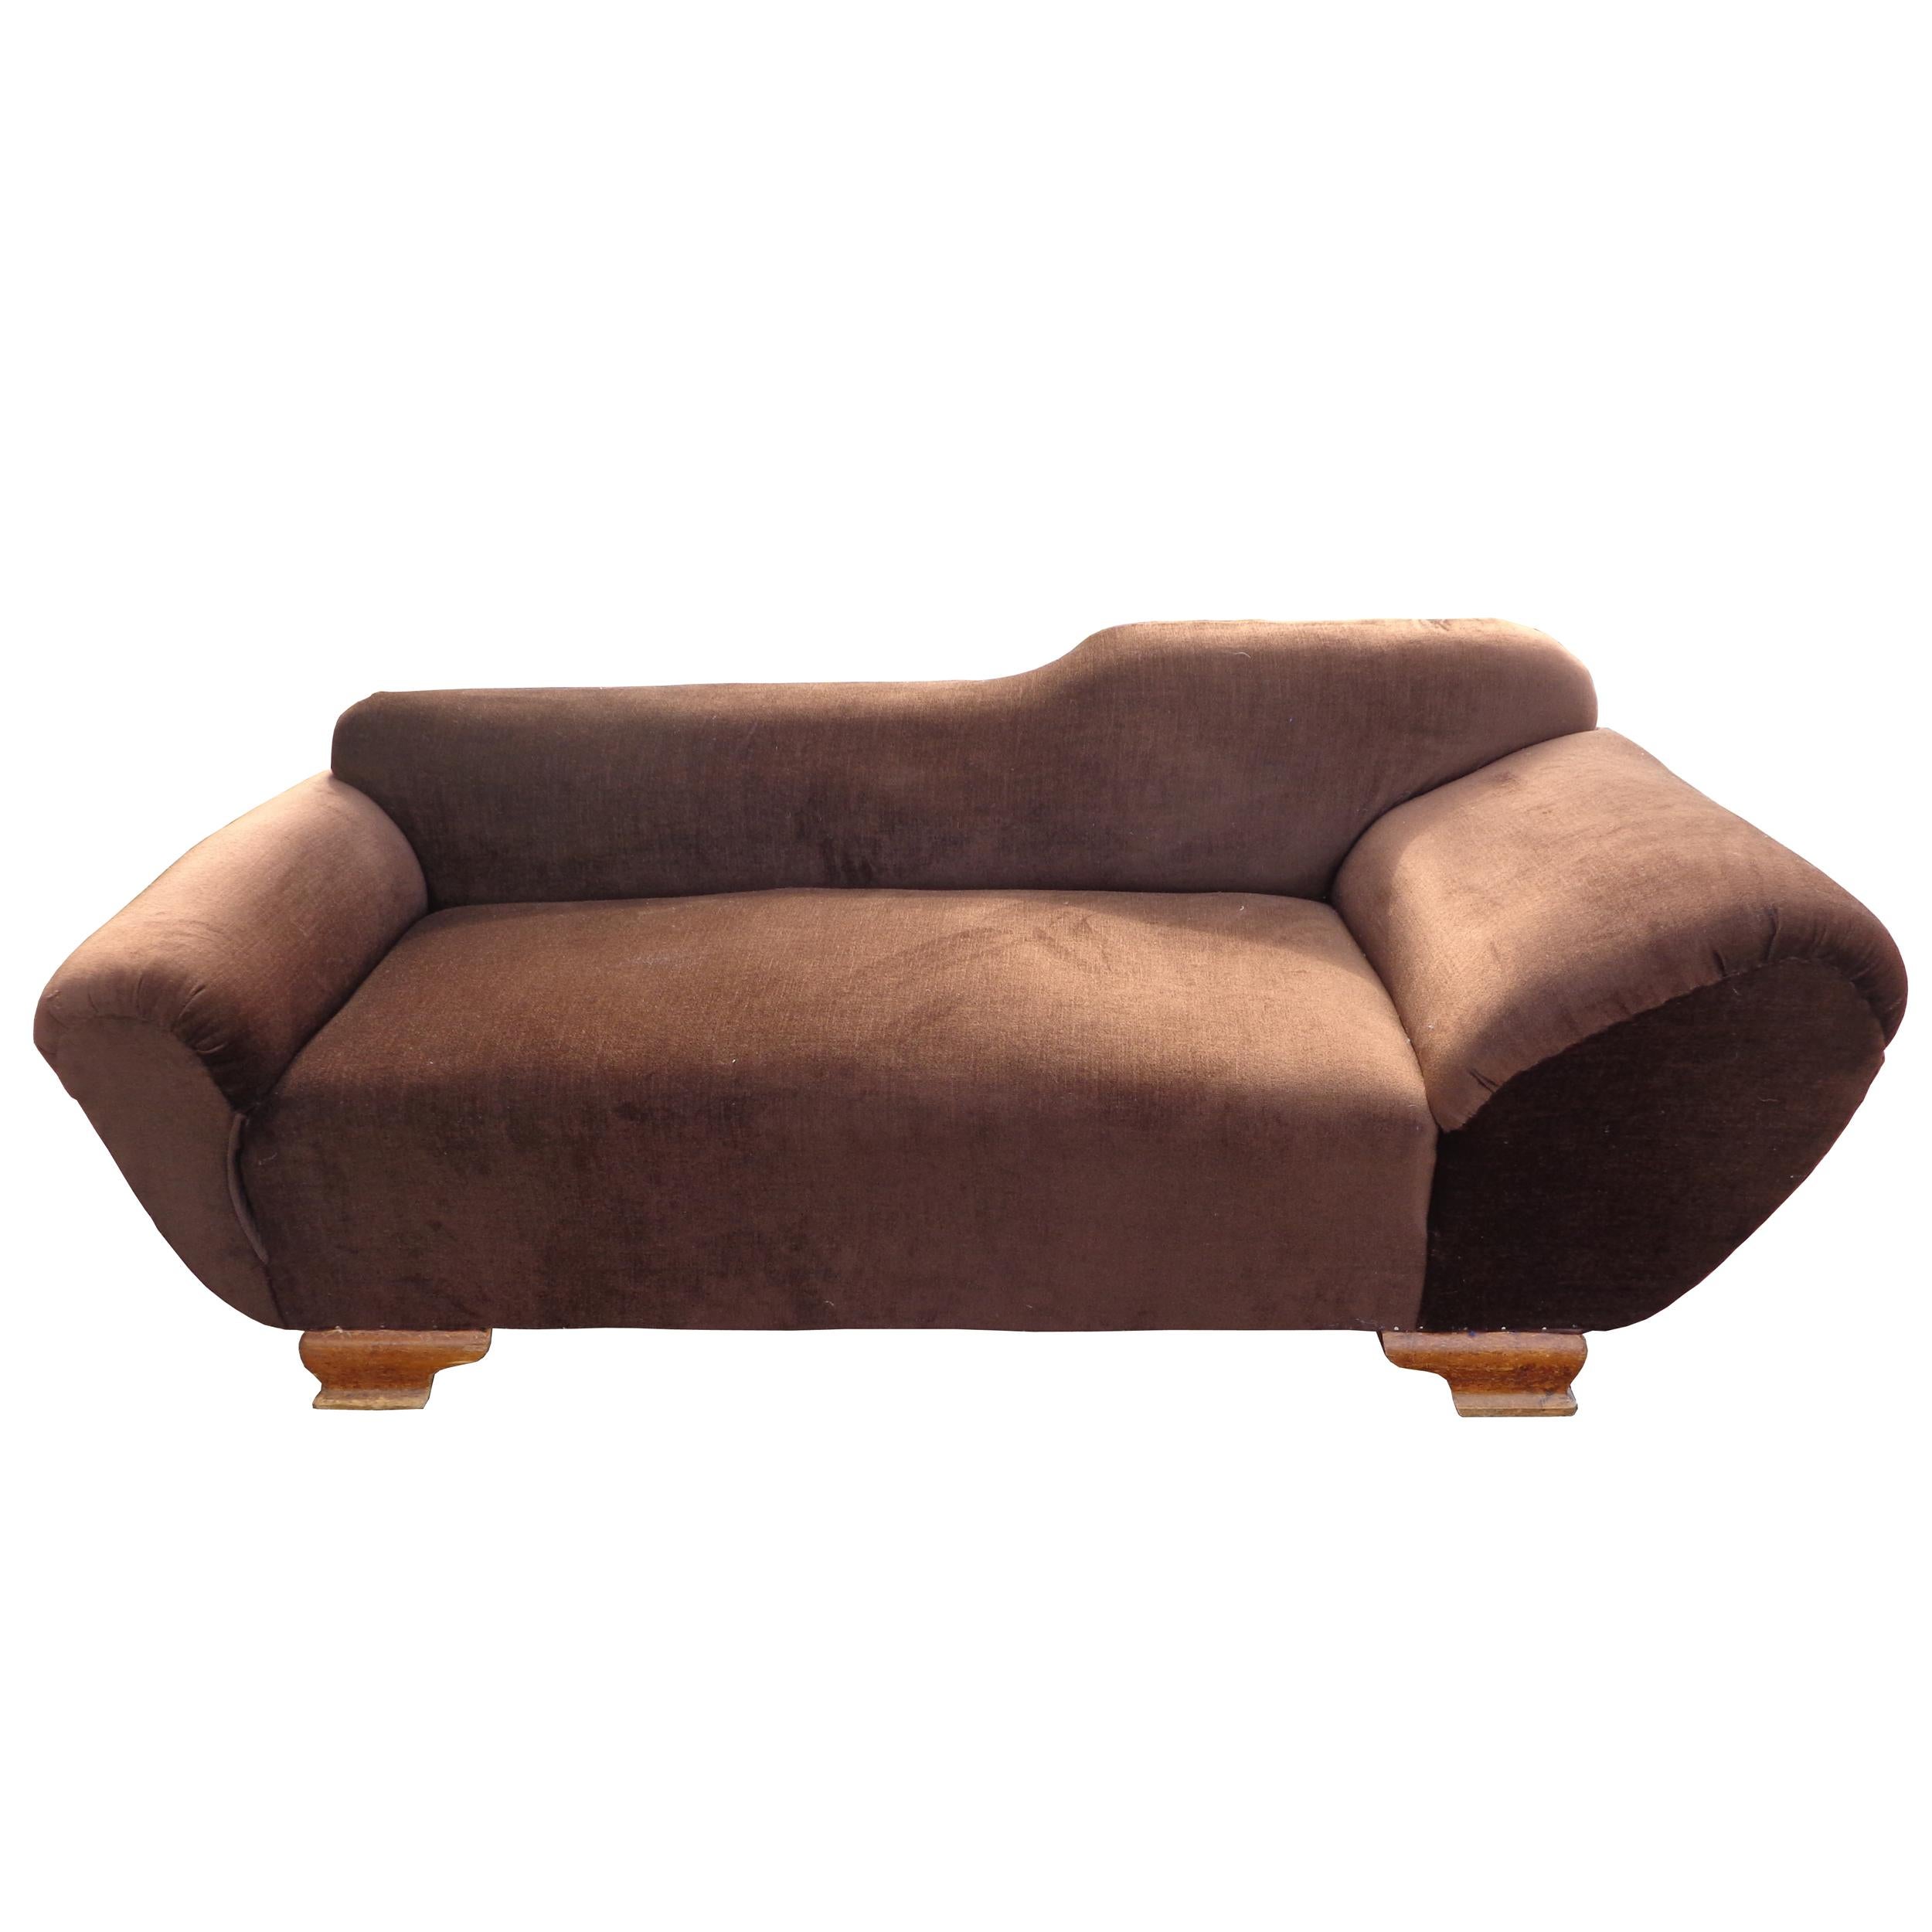 Art Deco Sofa
Asymmetrical armrests and the backrest give this sofa more of the
character of a chaise lounge for reclining as well as sitting.
Rich brown velvet. Pedestal style feet.